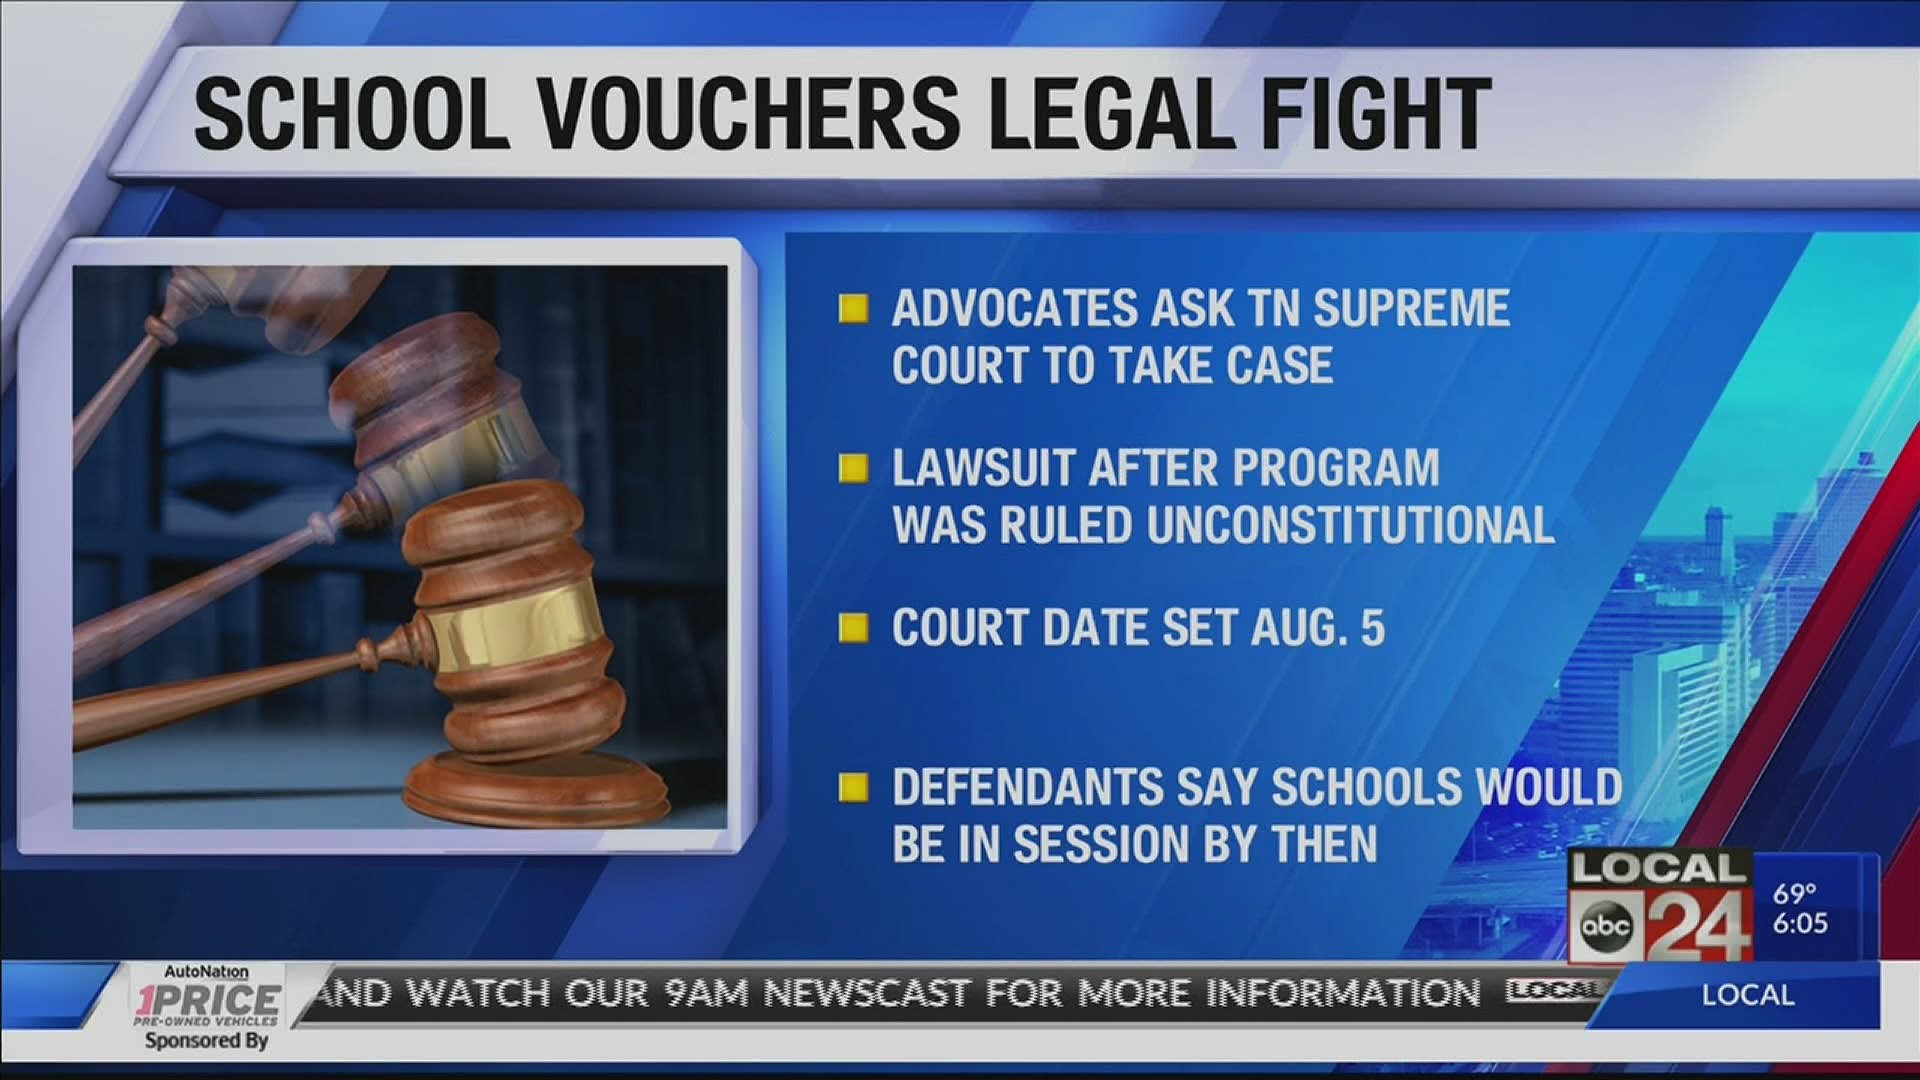 An appellate court ruled Tuesday that it would continue to block Gov. Bill Lee's signature school voucher program, formally known as education savings accounts